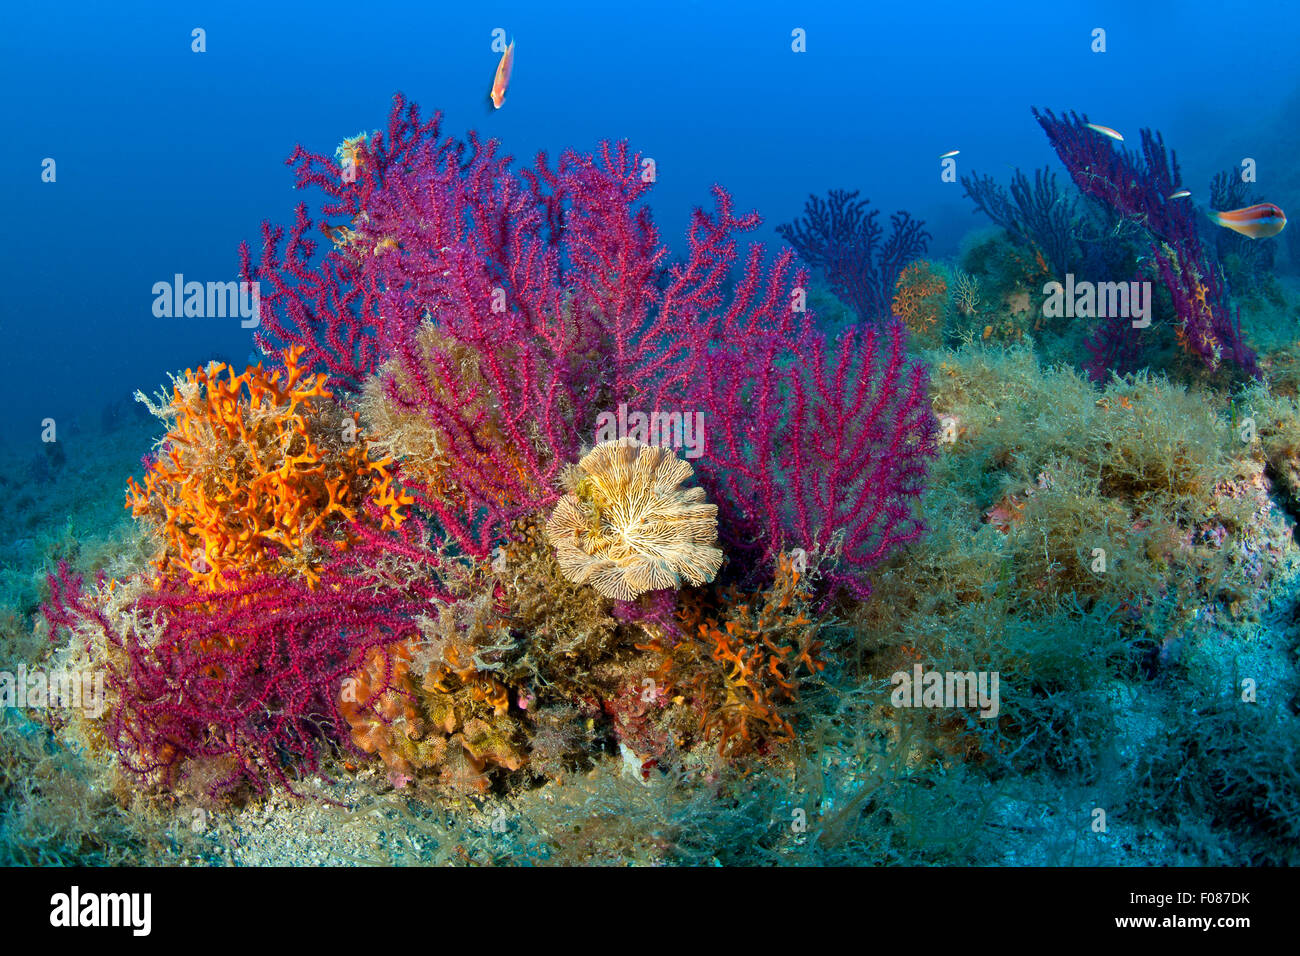 Variable Gorgonians in Coral Reef, Paramuricea clavata, Massa Lubrense, Campania, Italy Stock Photo